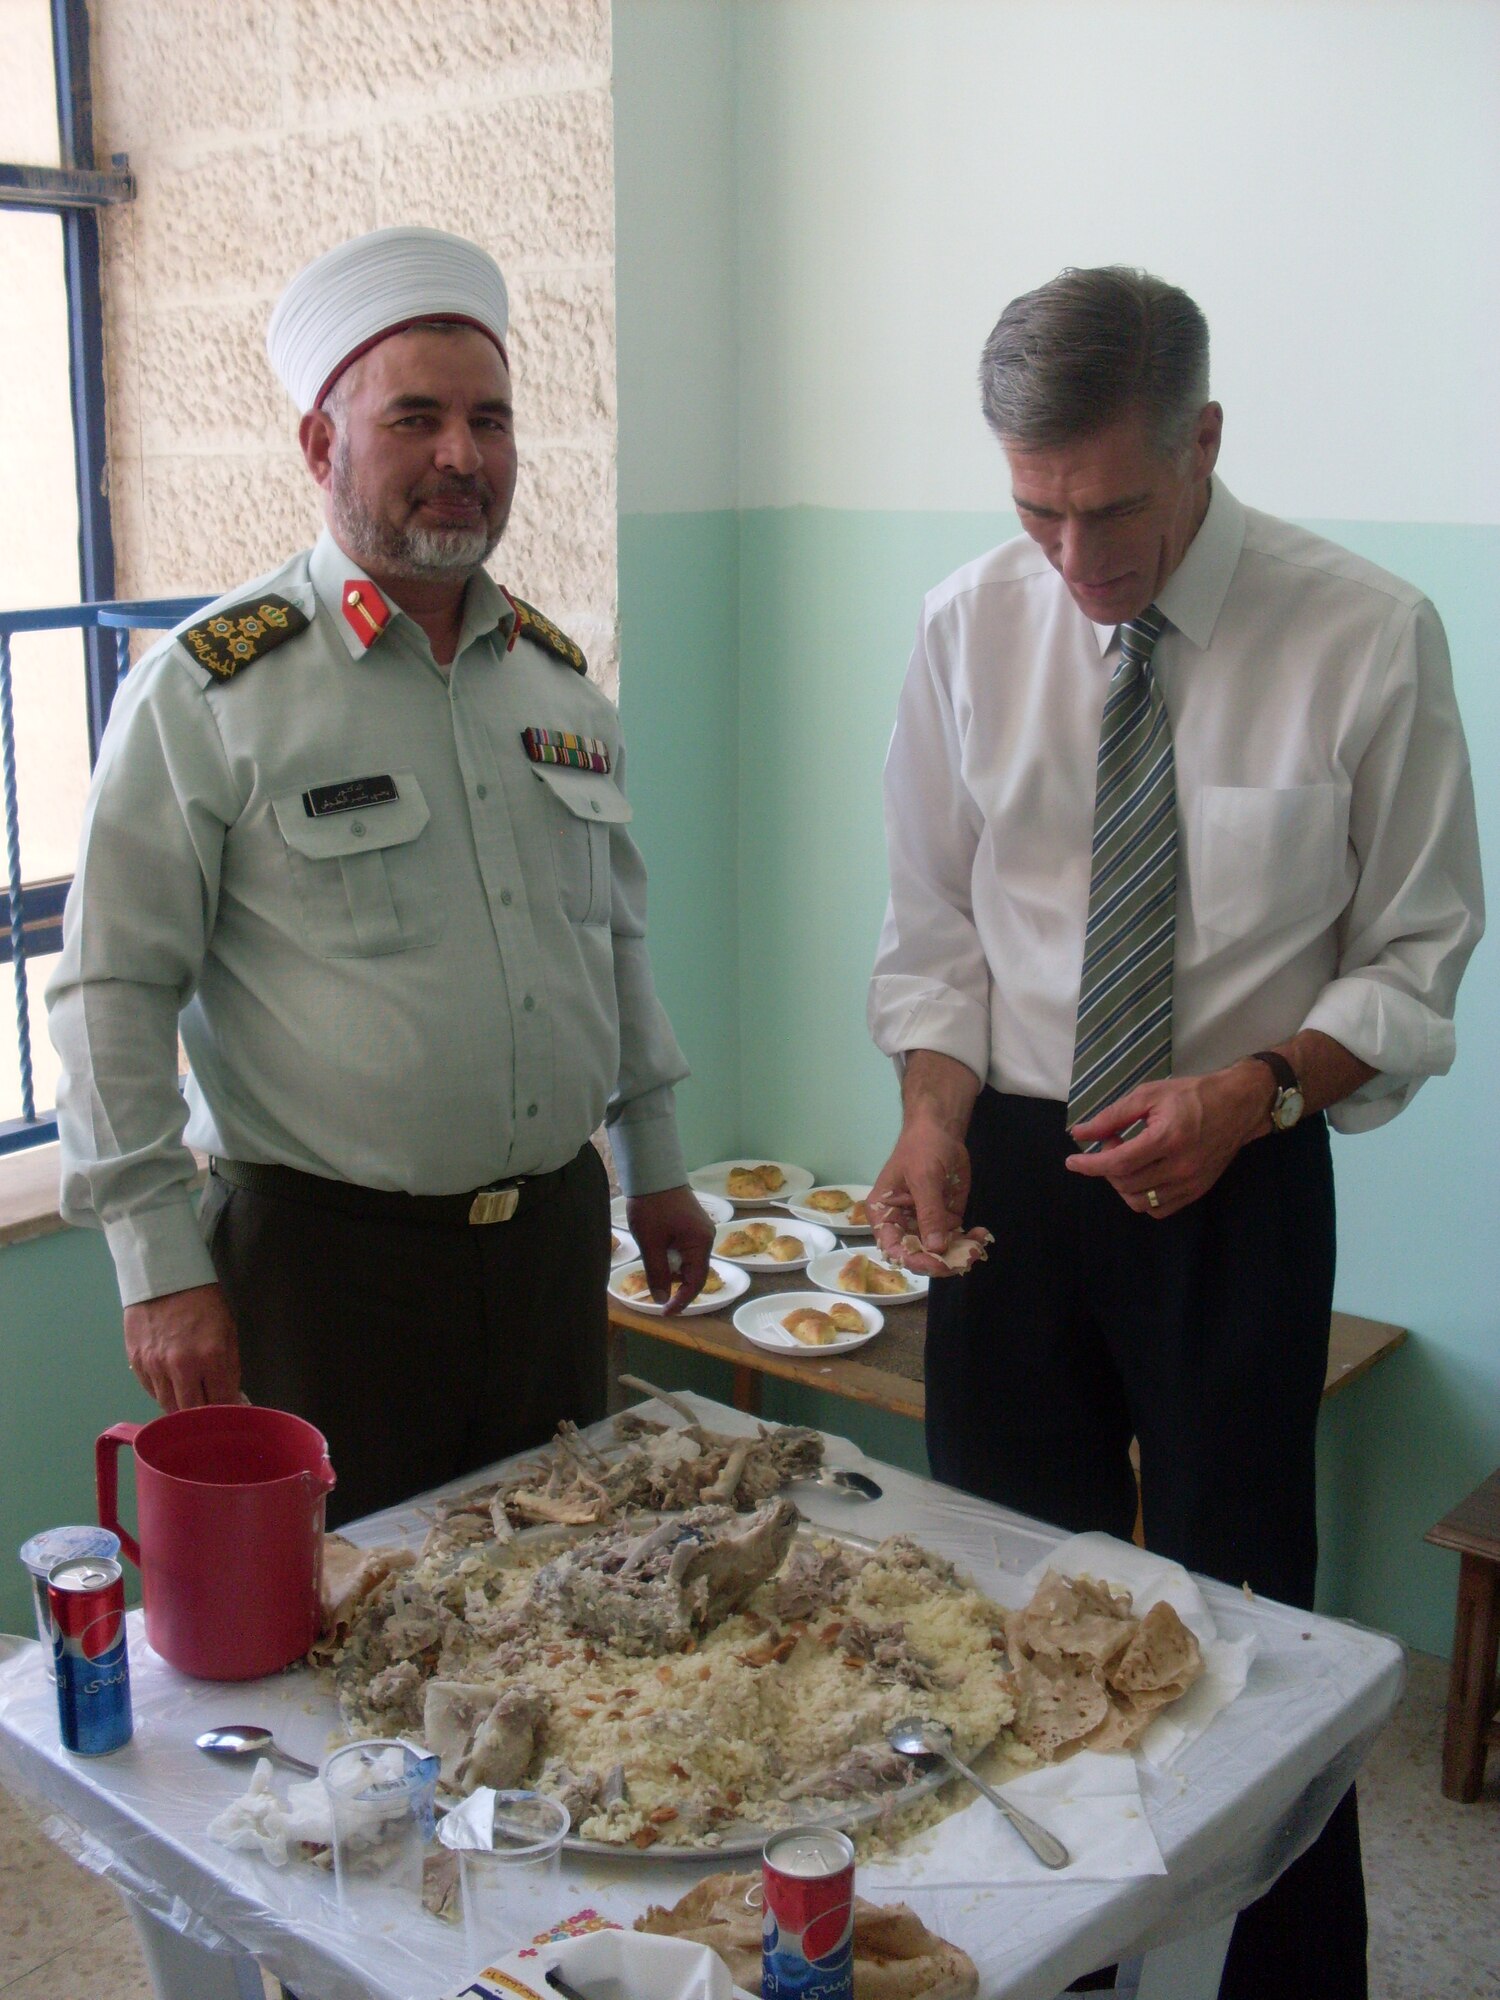 On the last day of the visit, the group enjoyed a traditional meal composed of four huge round trays covered with rice and slivered almonds; each tray was a sizeable cooked goat. Mufti (their senior chaplain) and Chaplain Prosise enjoyed the Mansef together. (Photo courtesy of Army Col. Andy Meverden, Colorado National Guard Chaplain)